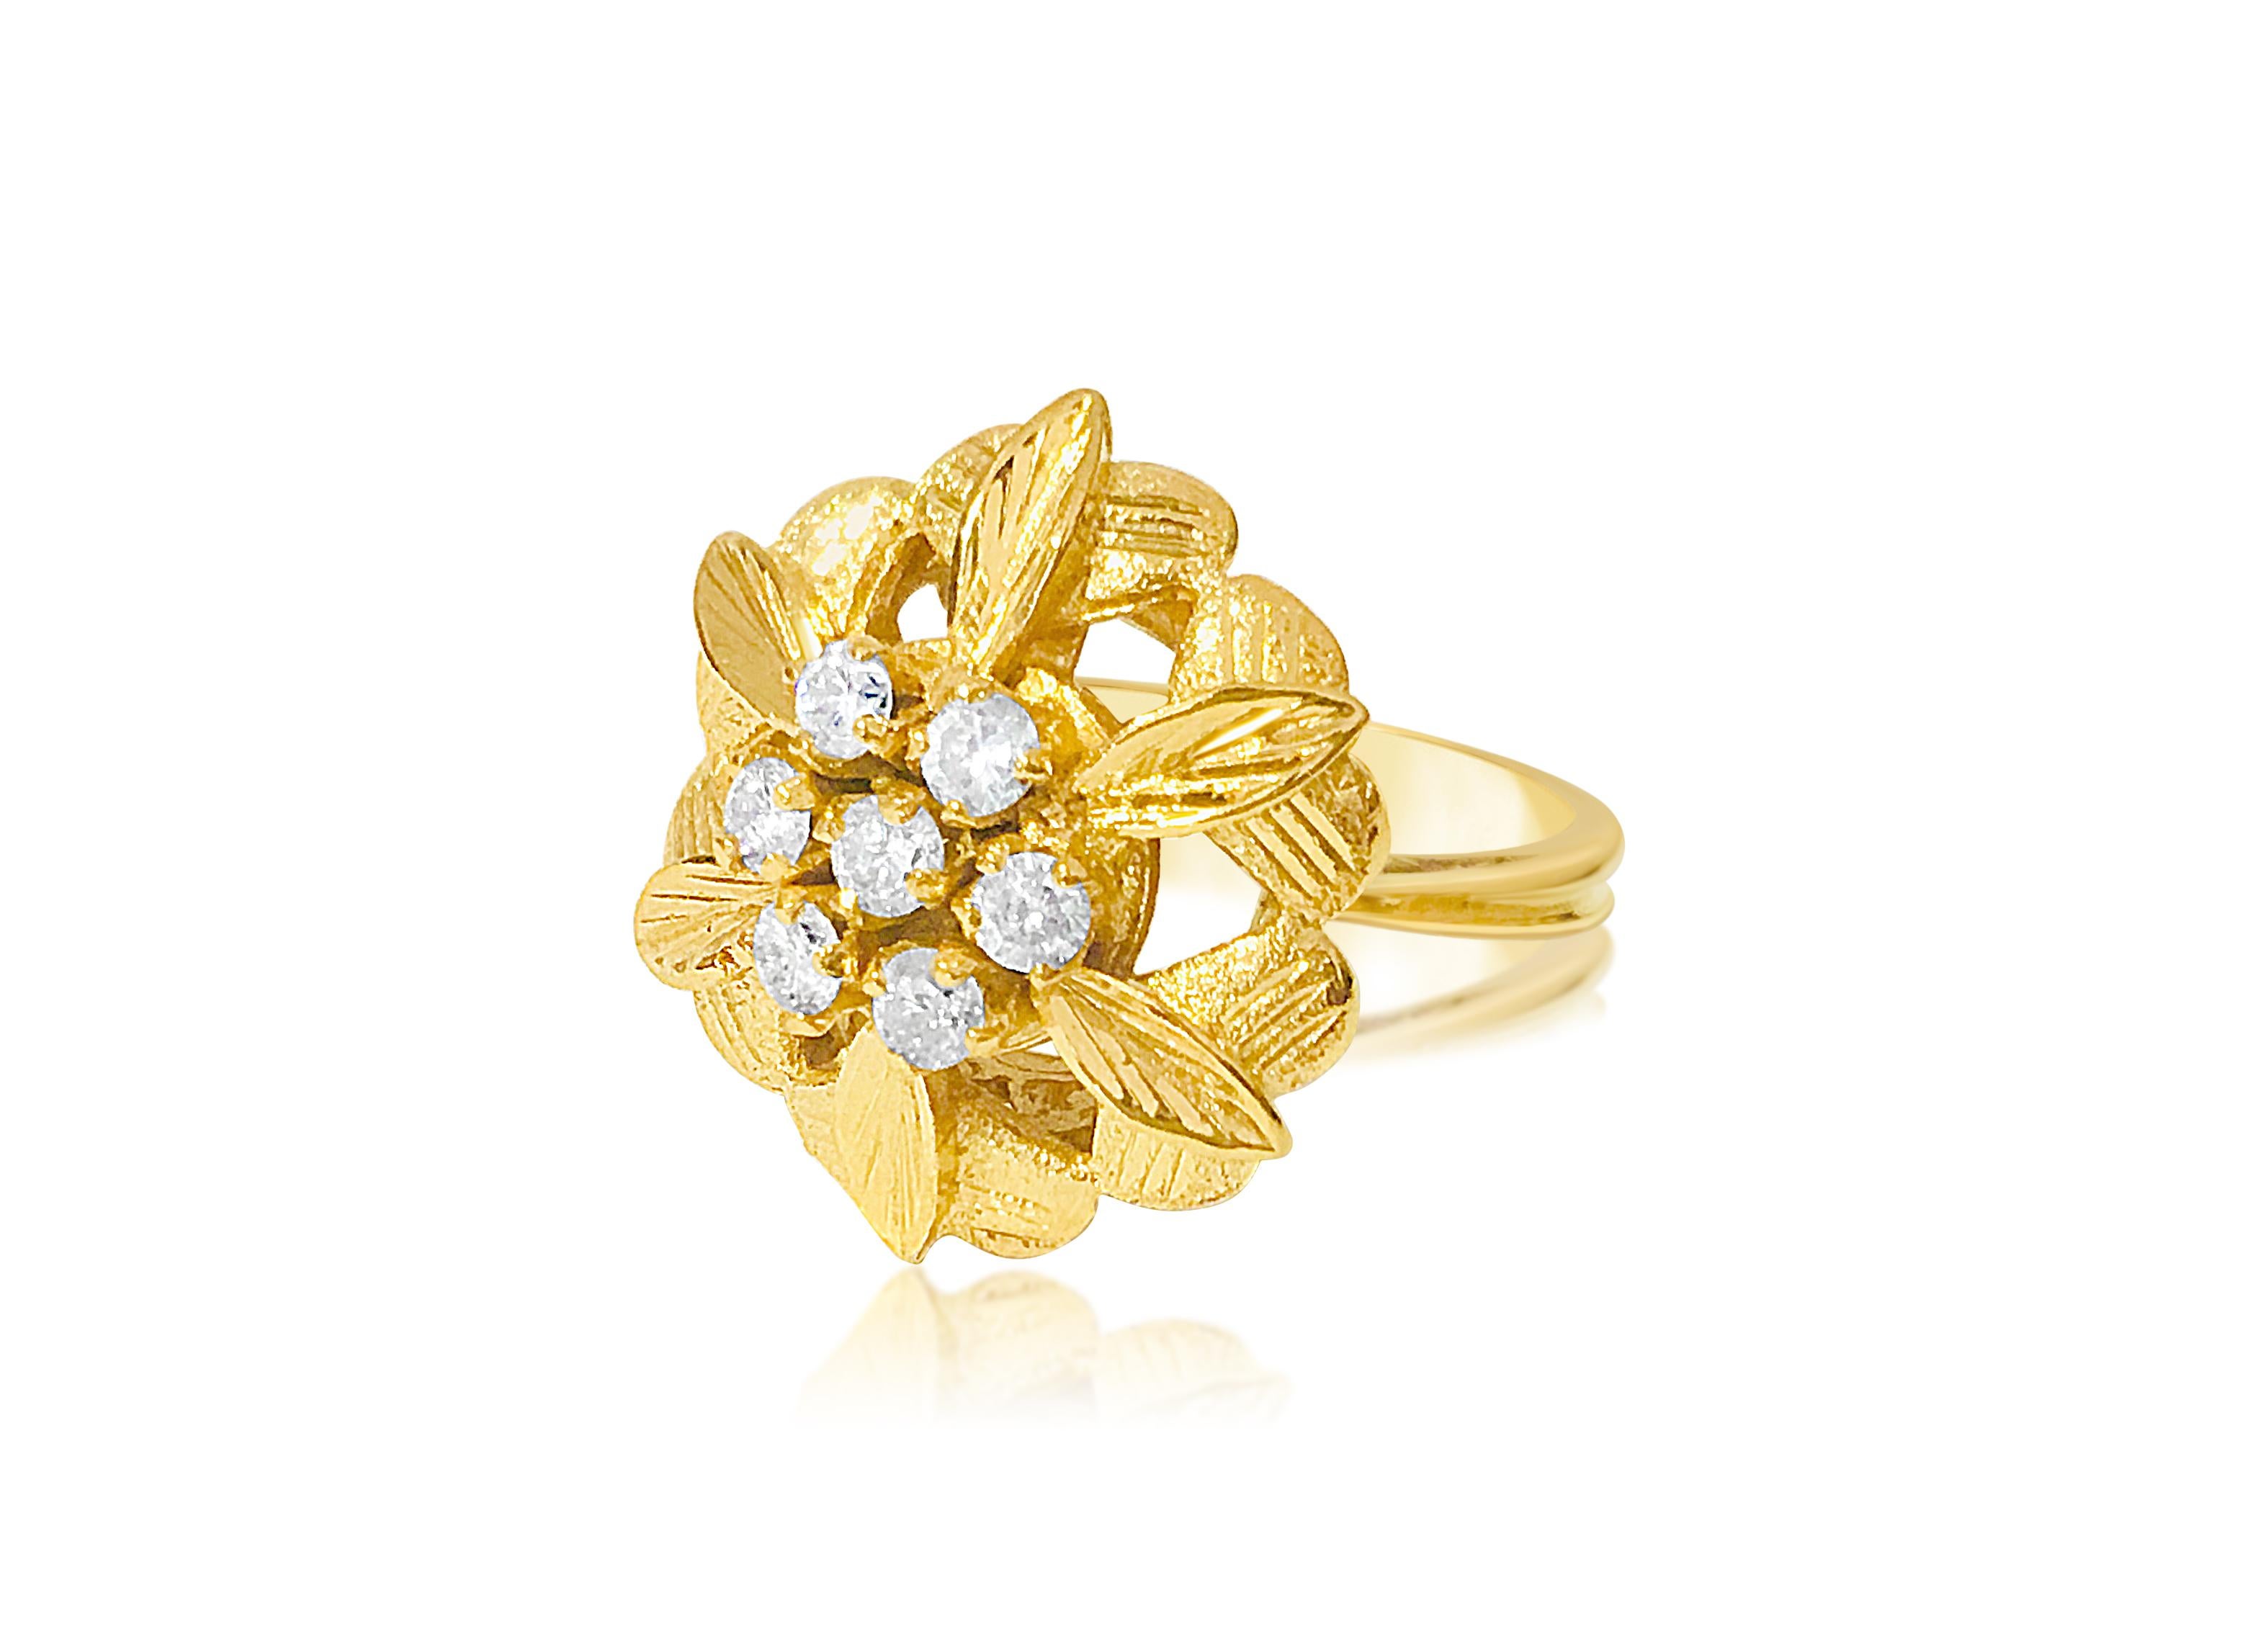 Metal: 18K yellow gold. 
0.38 carat diamonds total. SI clarity and F-G color. 100% natural earth mined diamonds. Round brilliant cut diamonds set in prongs.
Ring size: US 5. Free ring resizing available.
Gorgeous open flower inspired vintage ring.